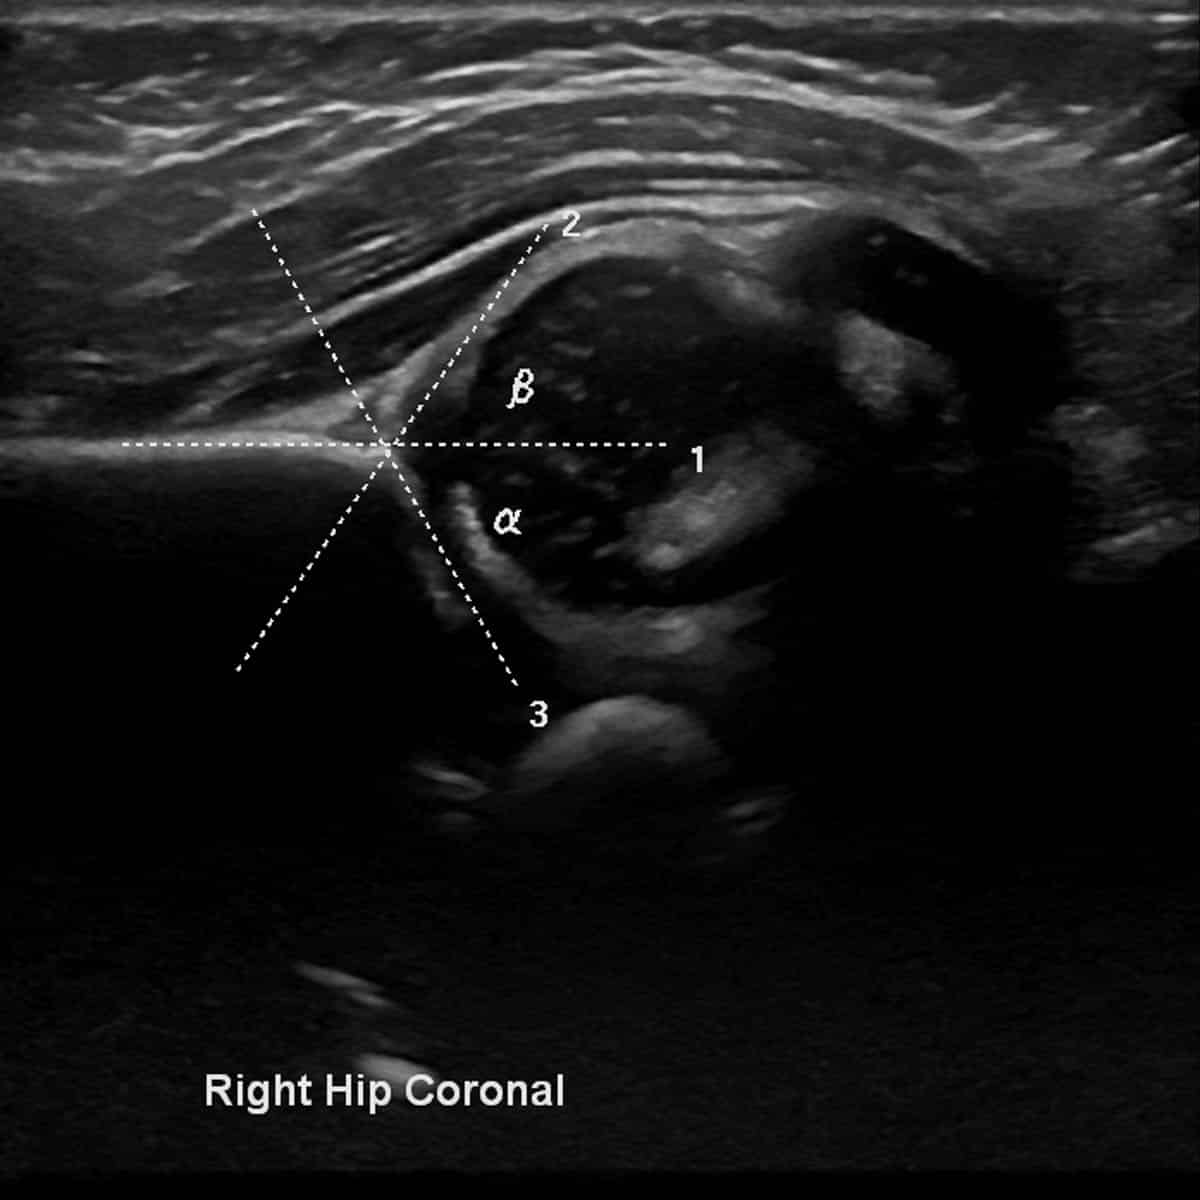 ultrasound of a right hip coronal